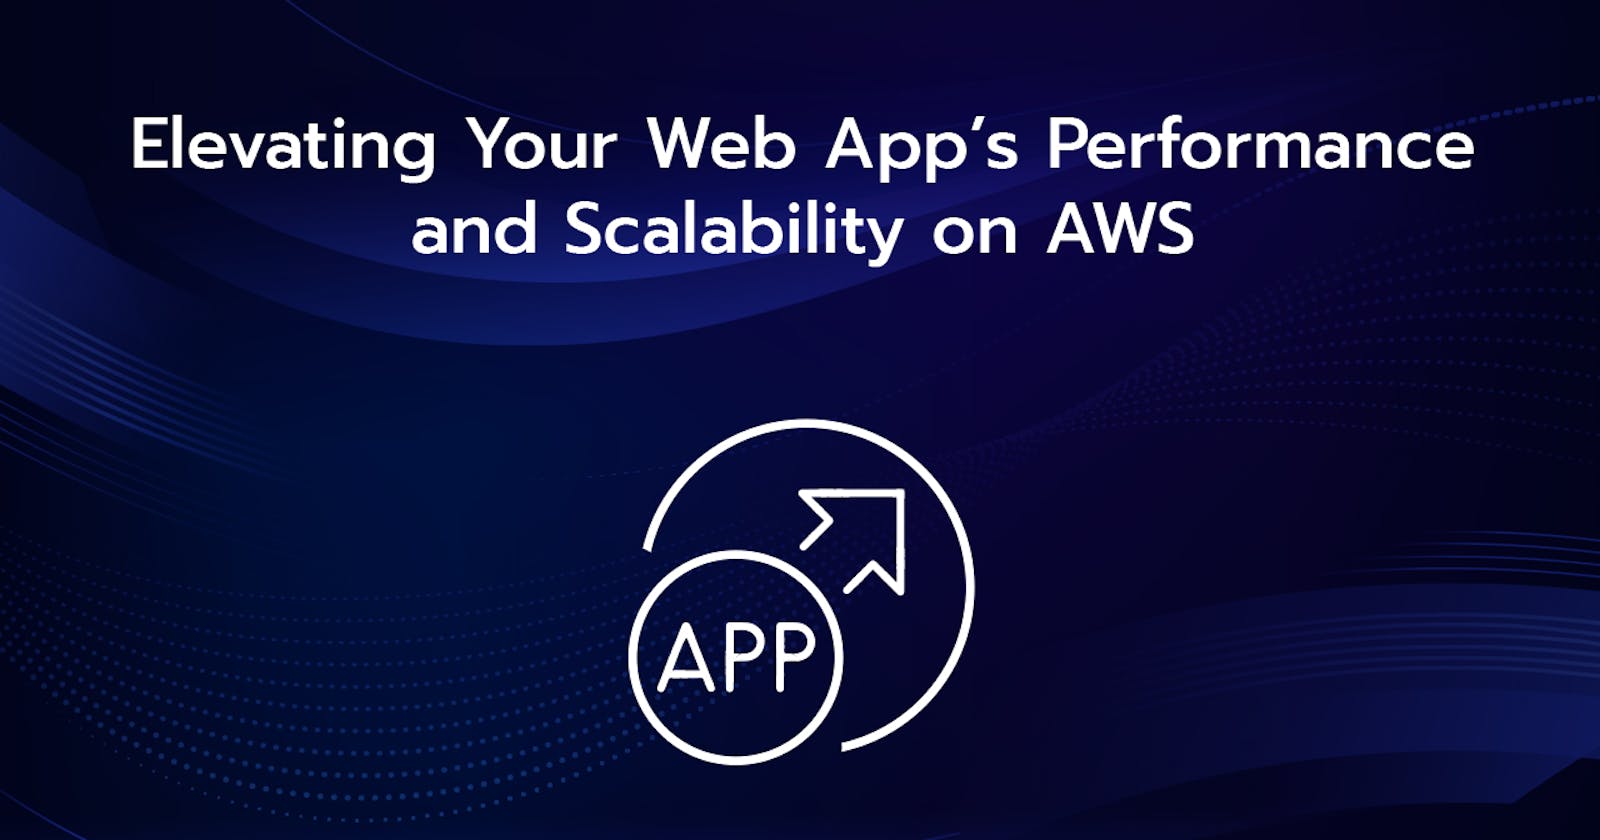 Elevating Your Web App’s Performance and Scalability on AWS